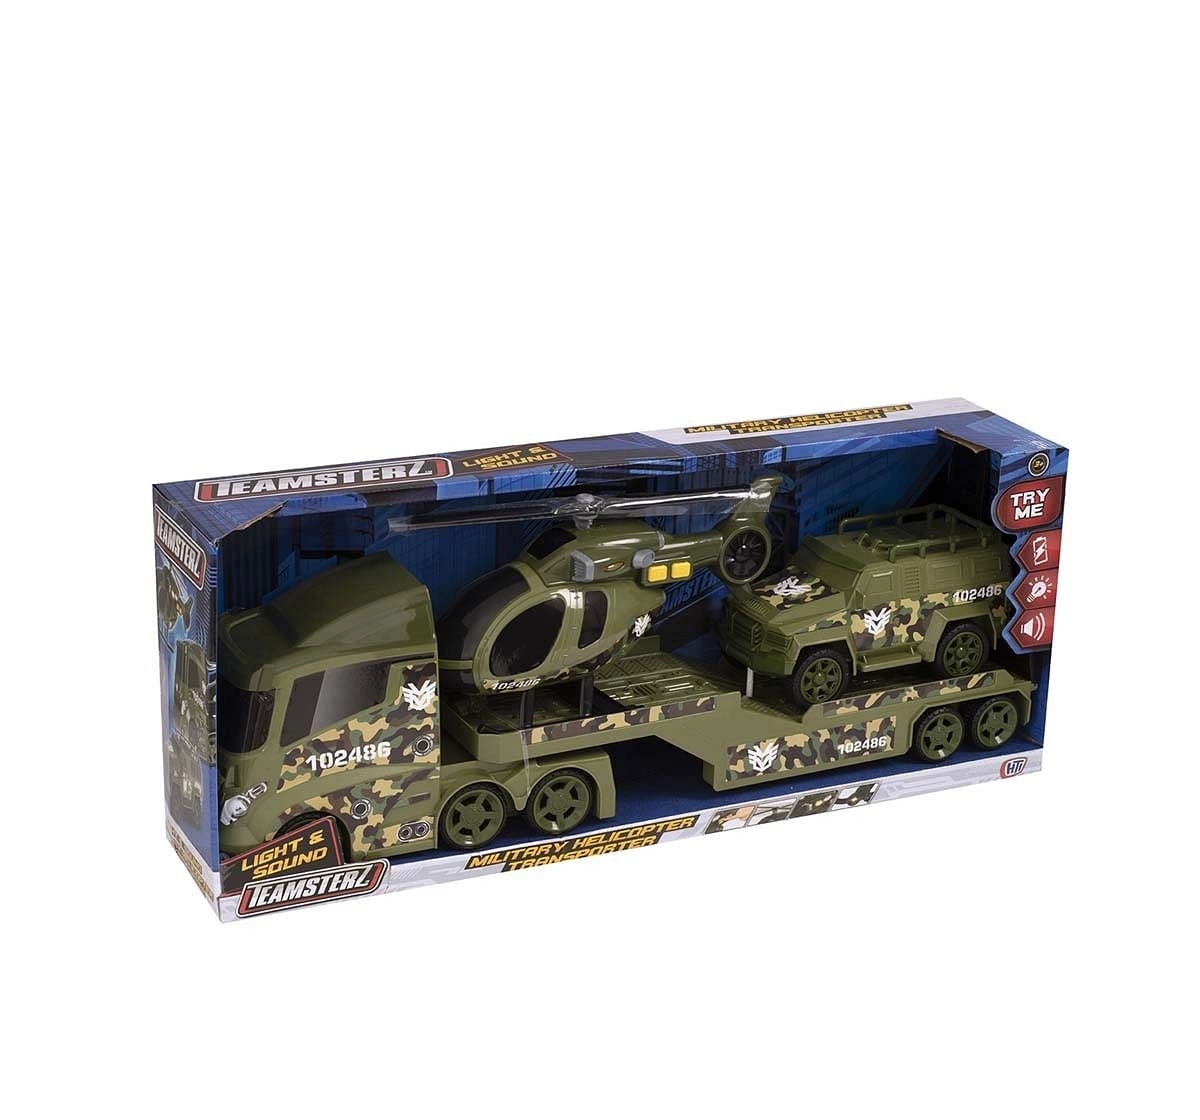 Teamsterz Light And Sound Military Transporter Vehicles for Kids Age 3Y+